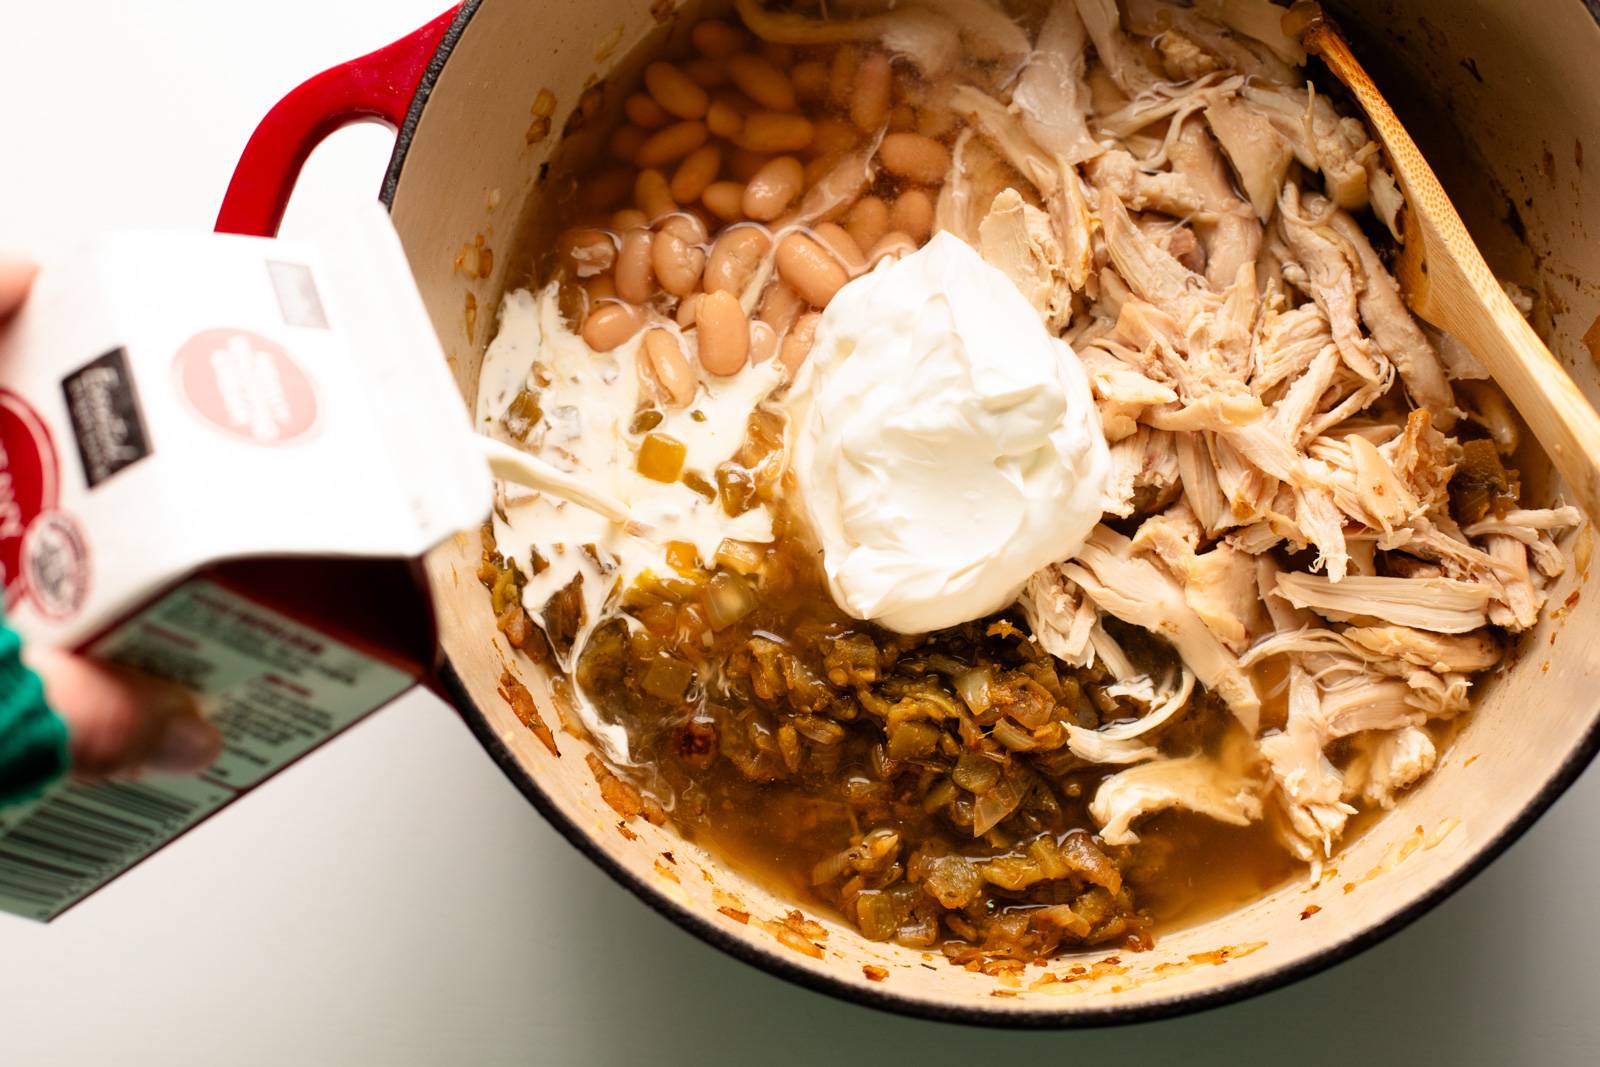 Chicken, sour cream, and beans going into the white chicken chili